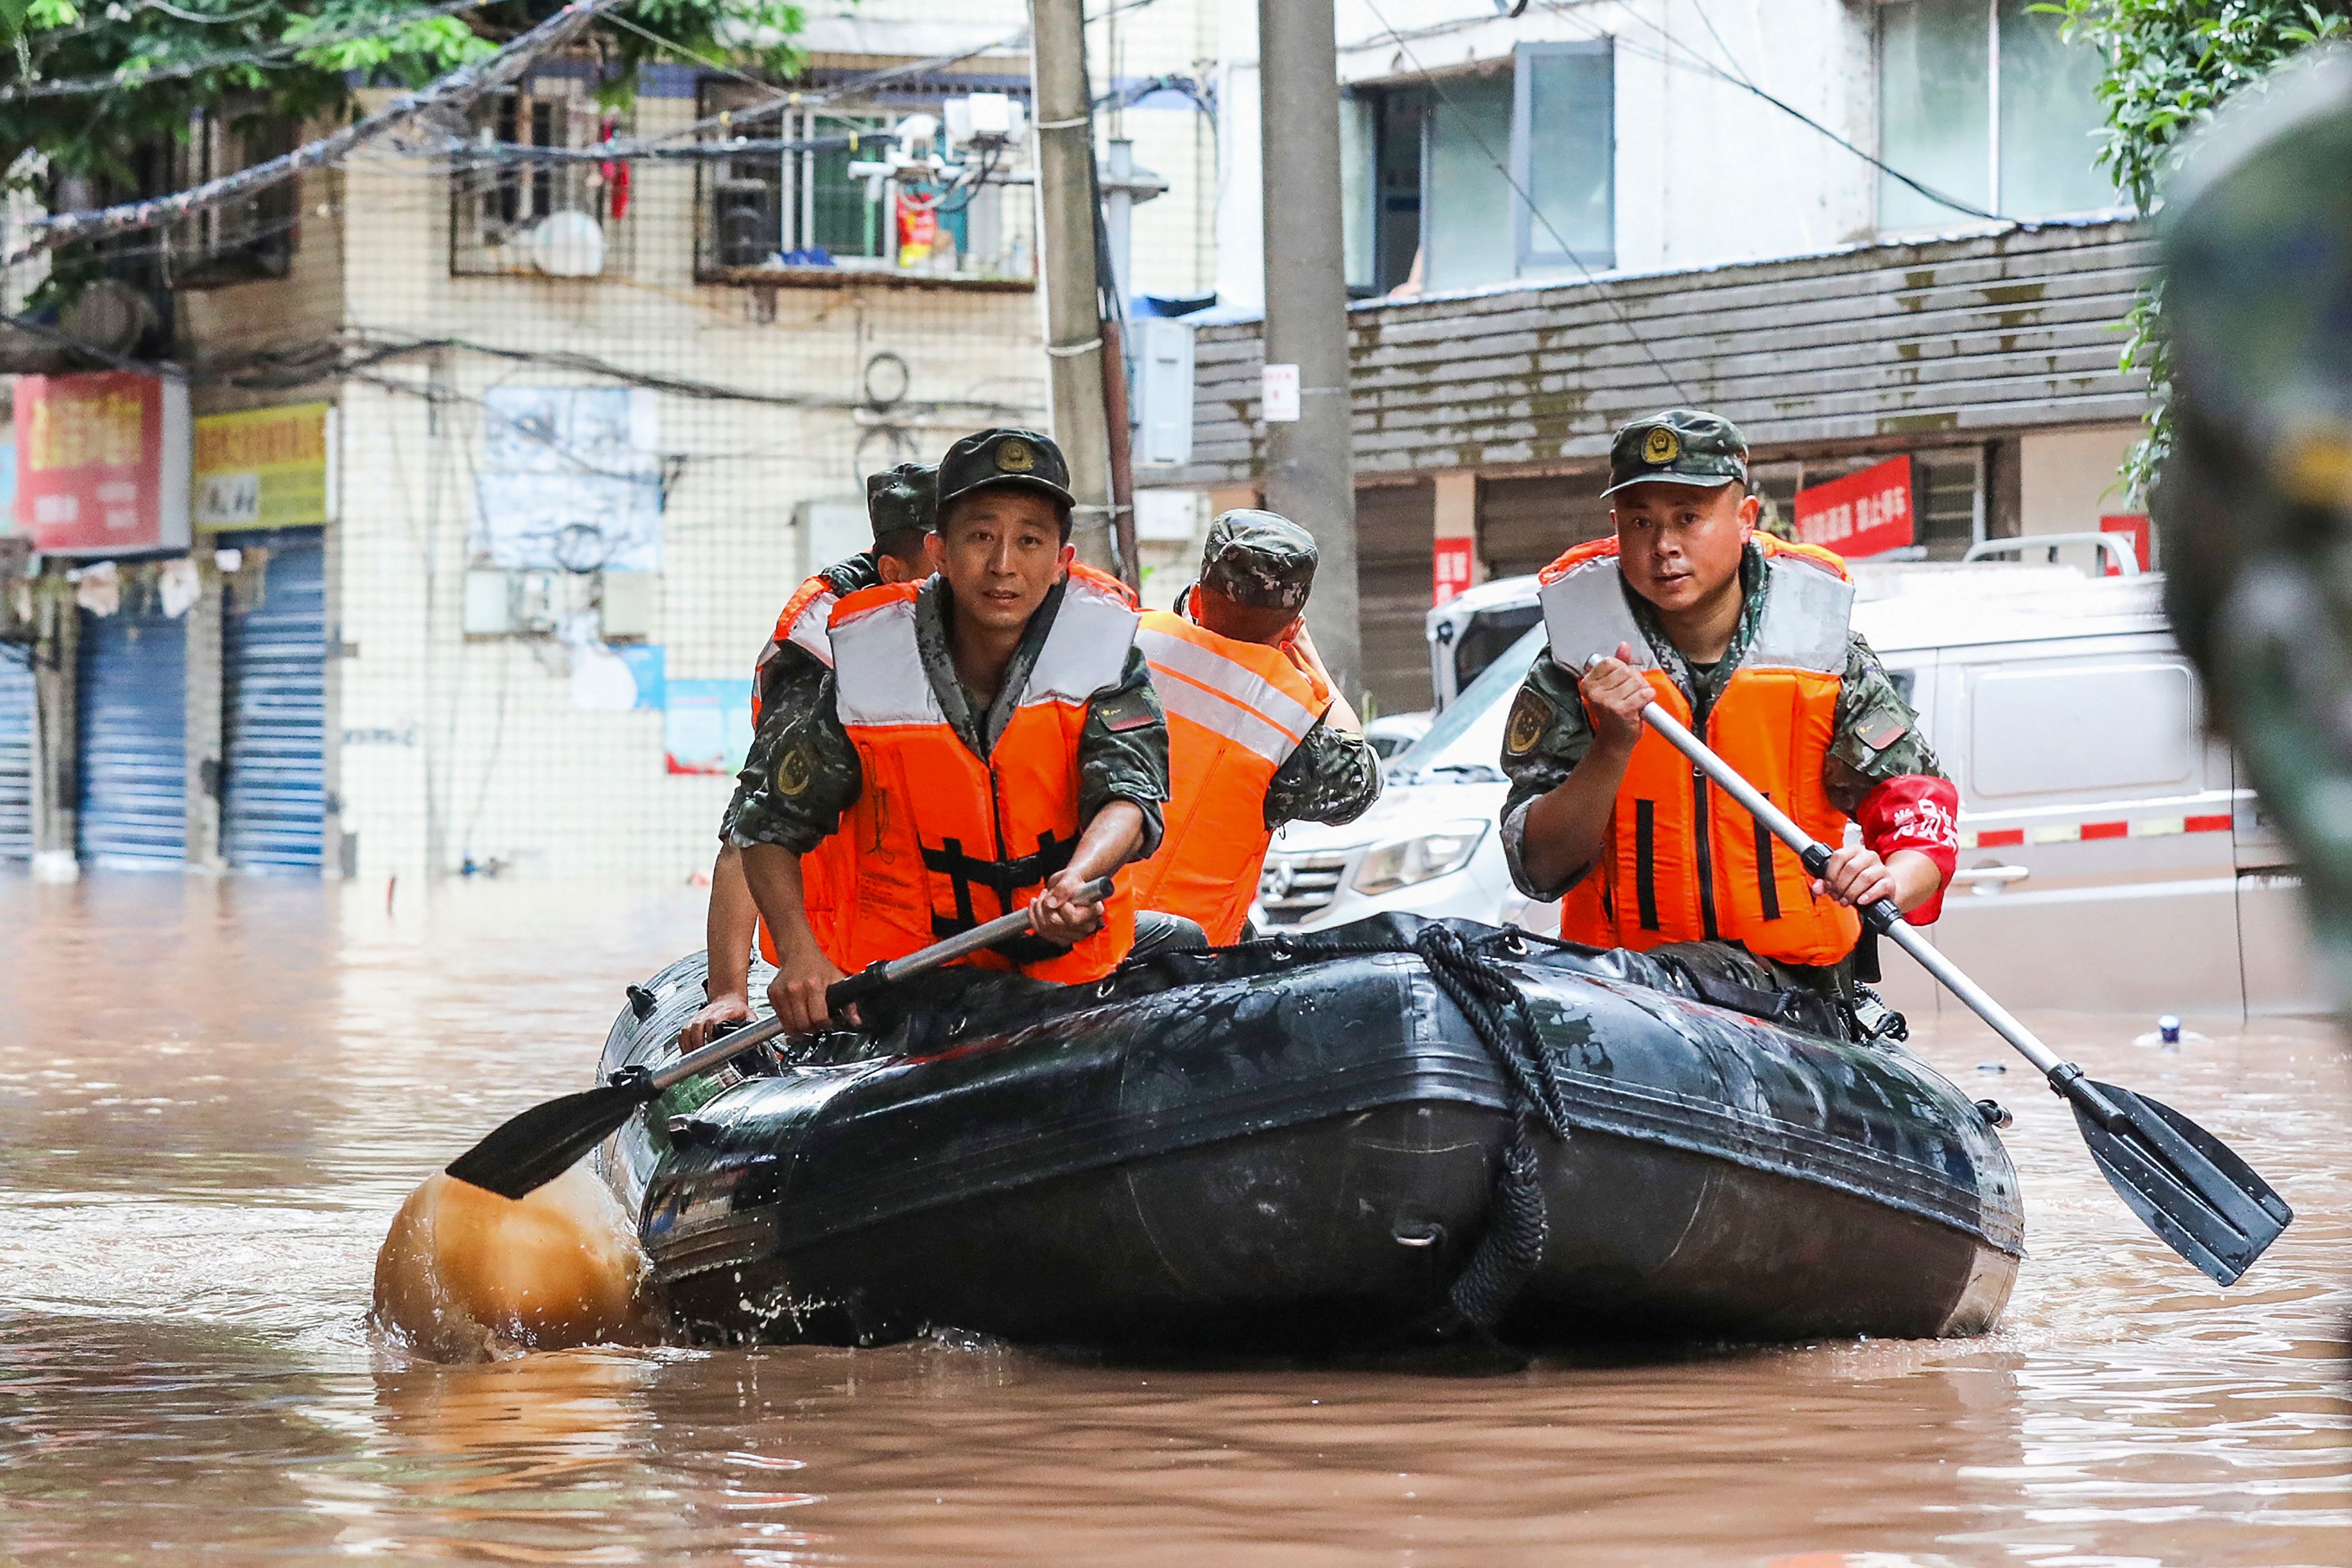 Paramilitary policemen search an area after it was flooded by heavy rains in China’s southwestern Chongqing on 4 July